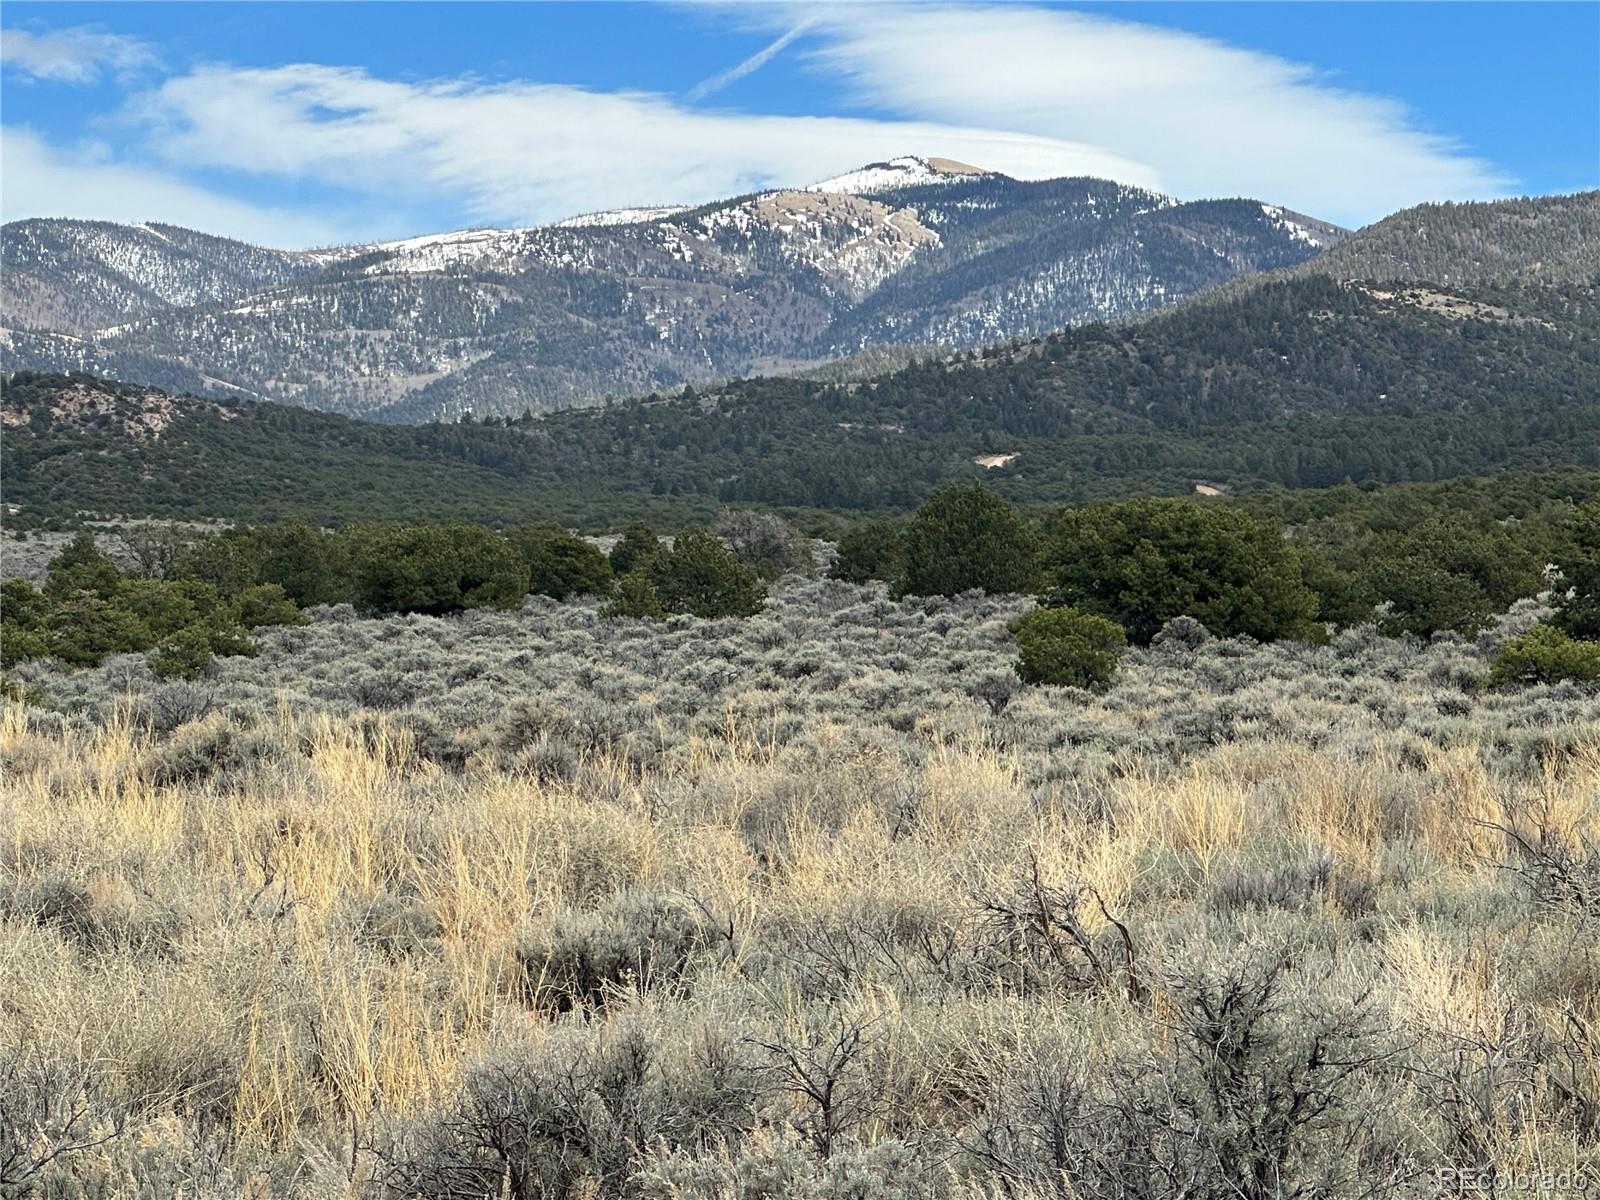 a view of a dry mountains in the distance